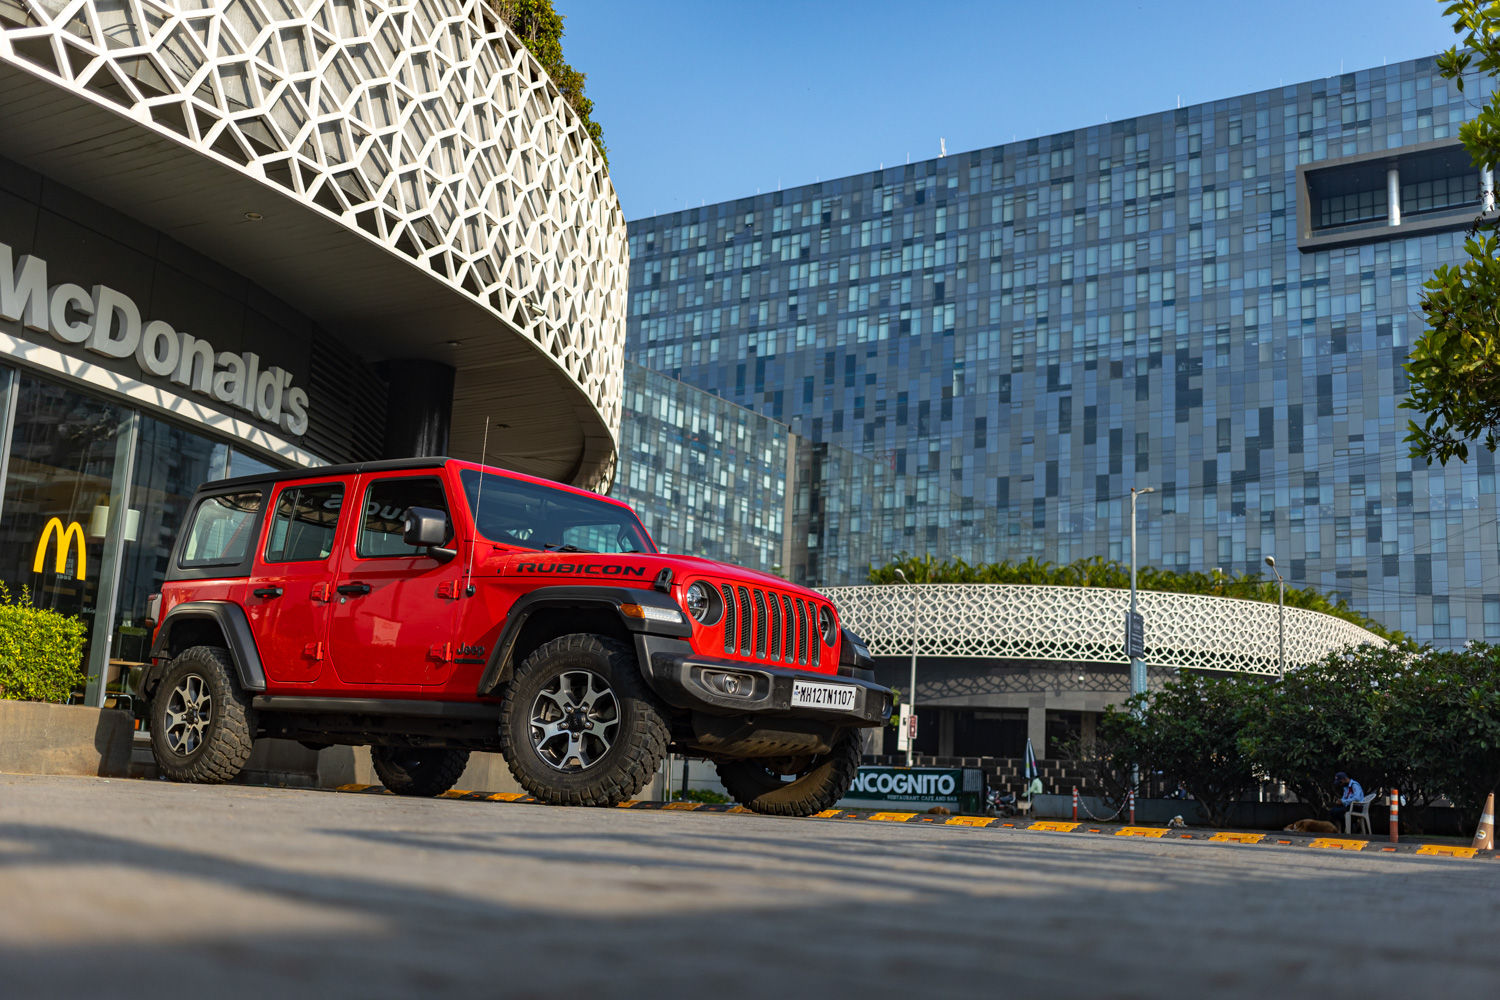 1 Jeep Wrangler Road Test Reviews from Experts 